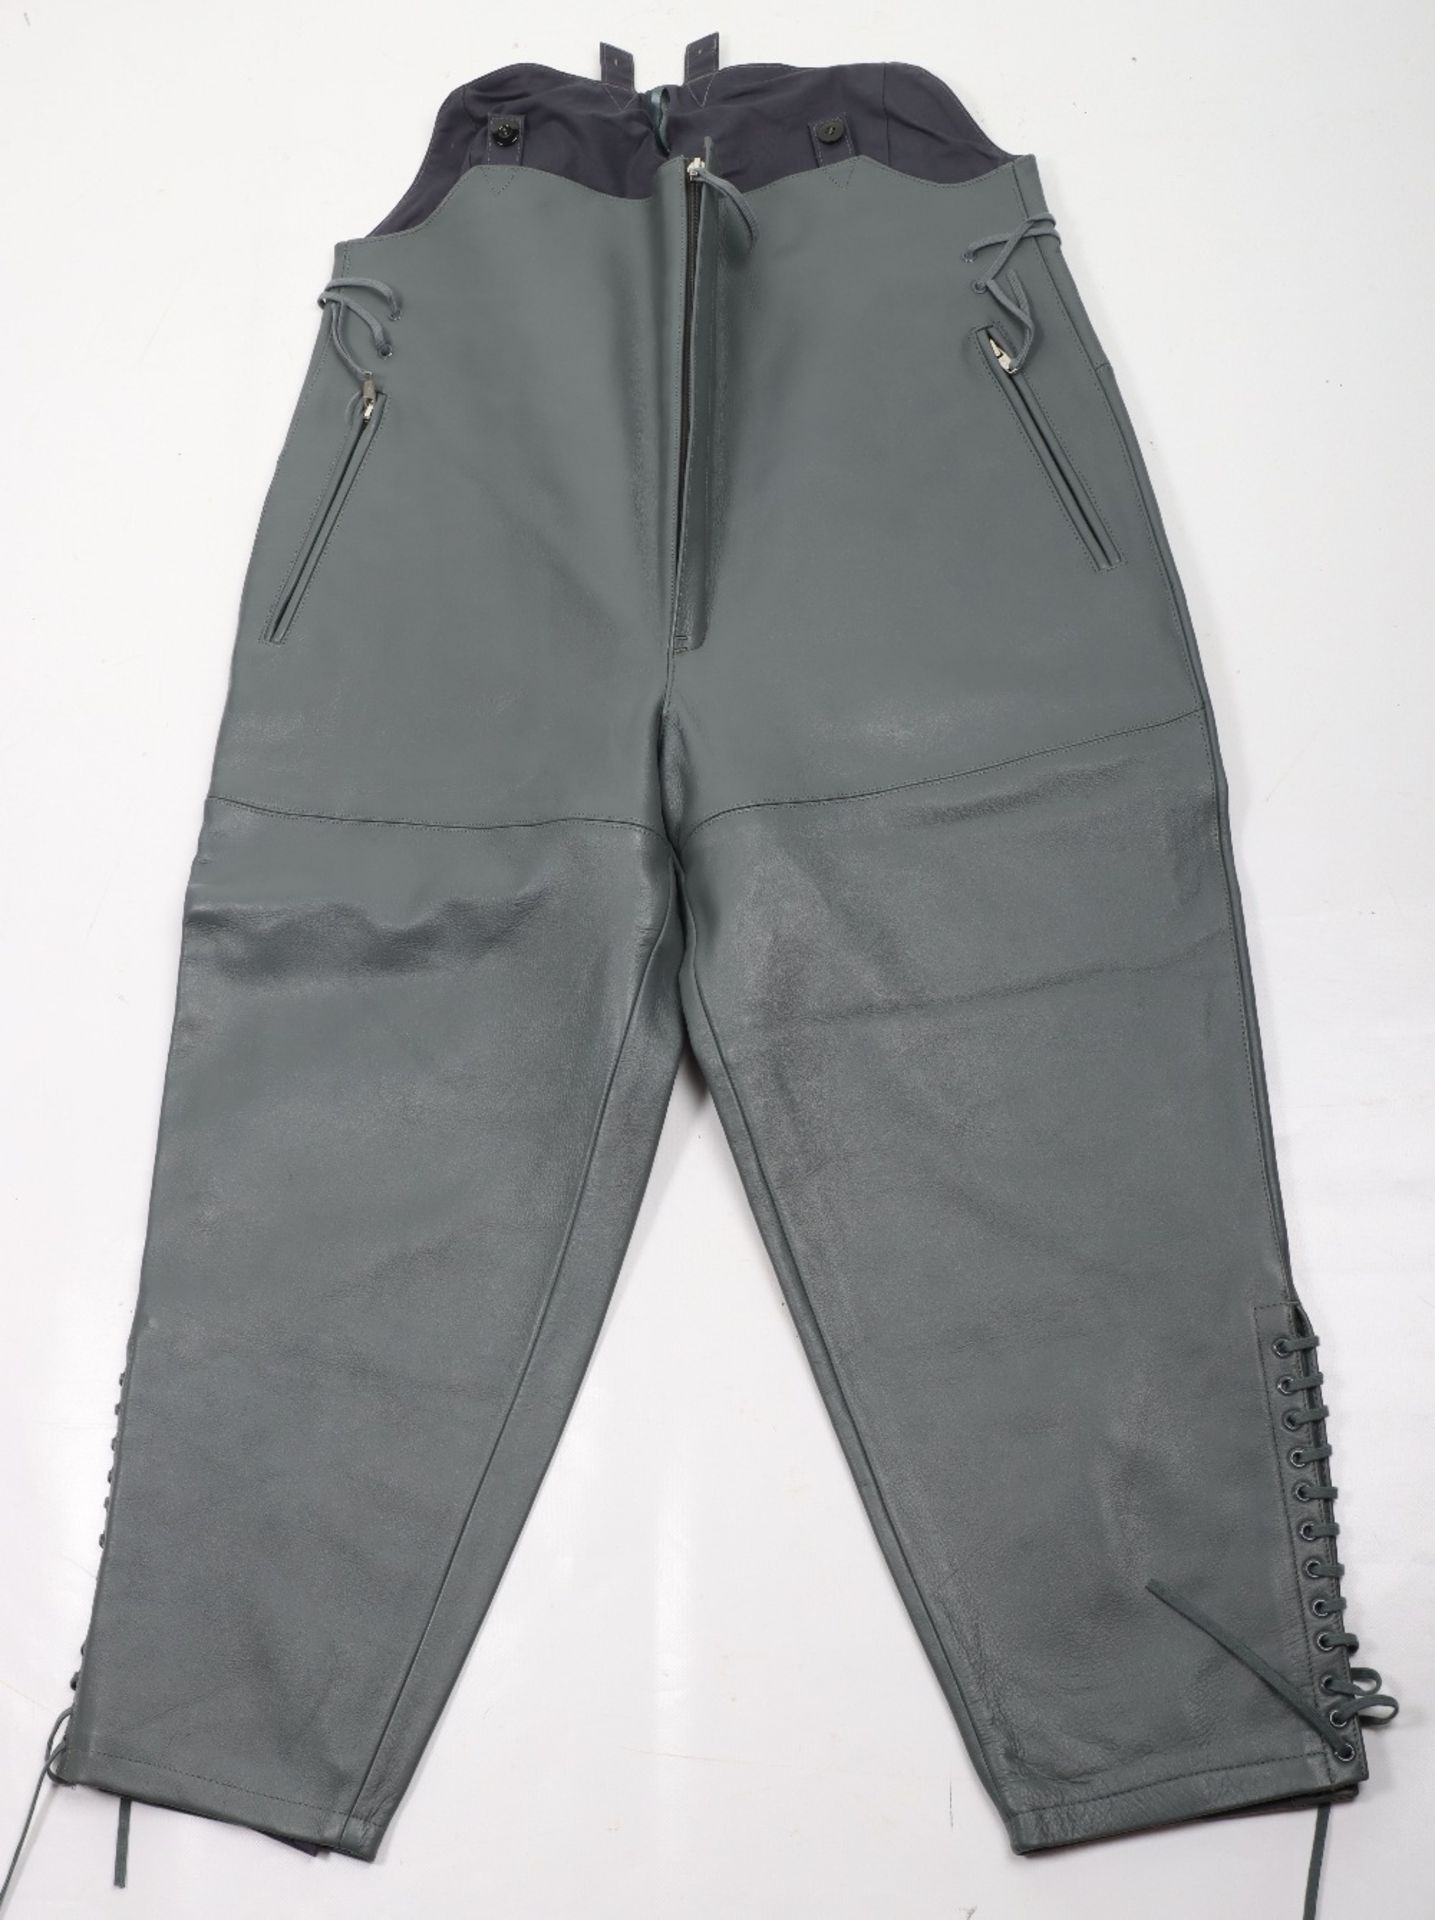 Pair of German Air Force Grey Leather Trousers - Image 3 of 3